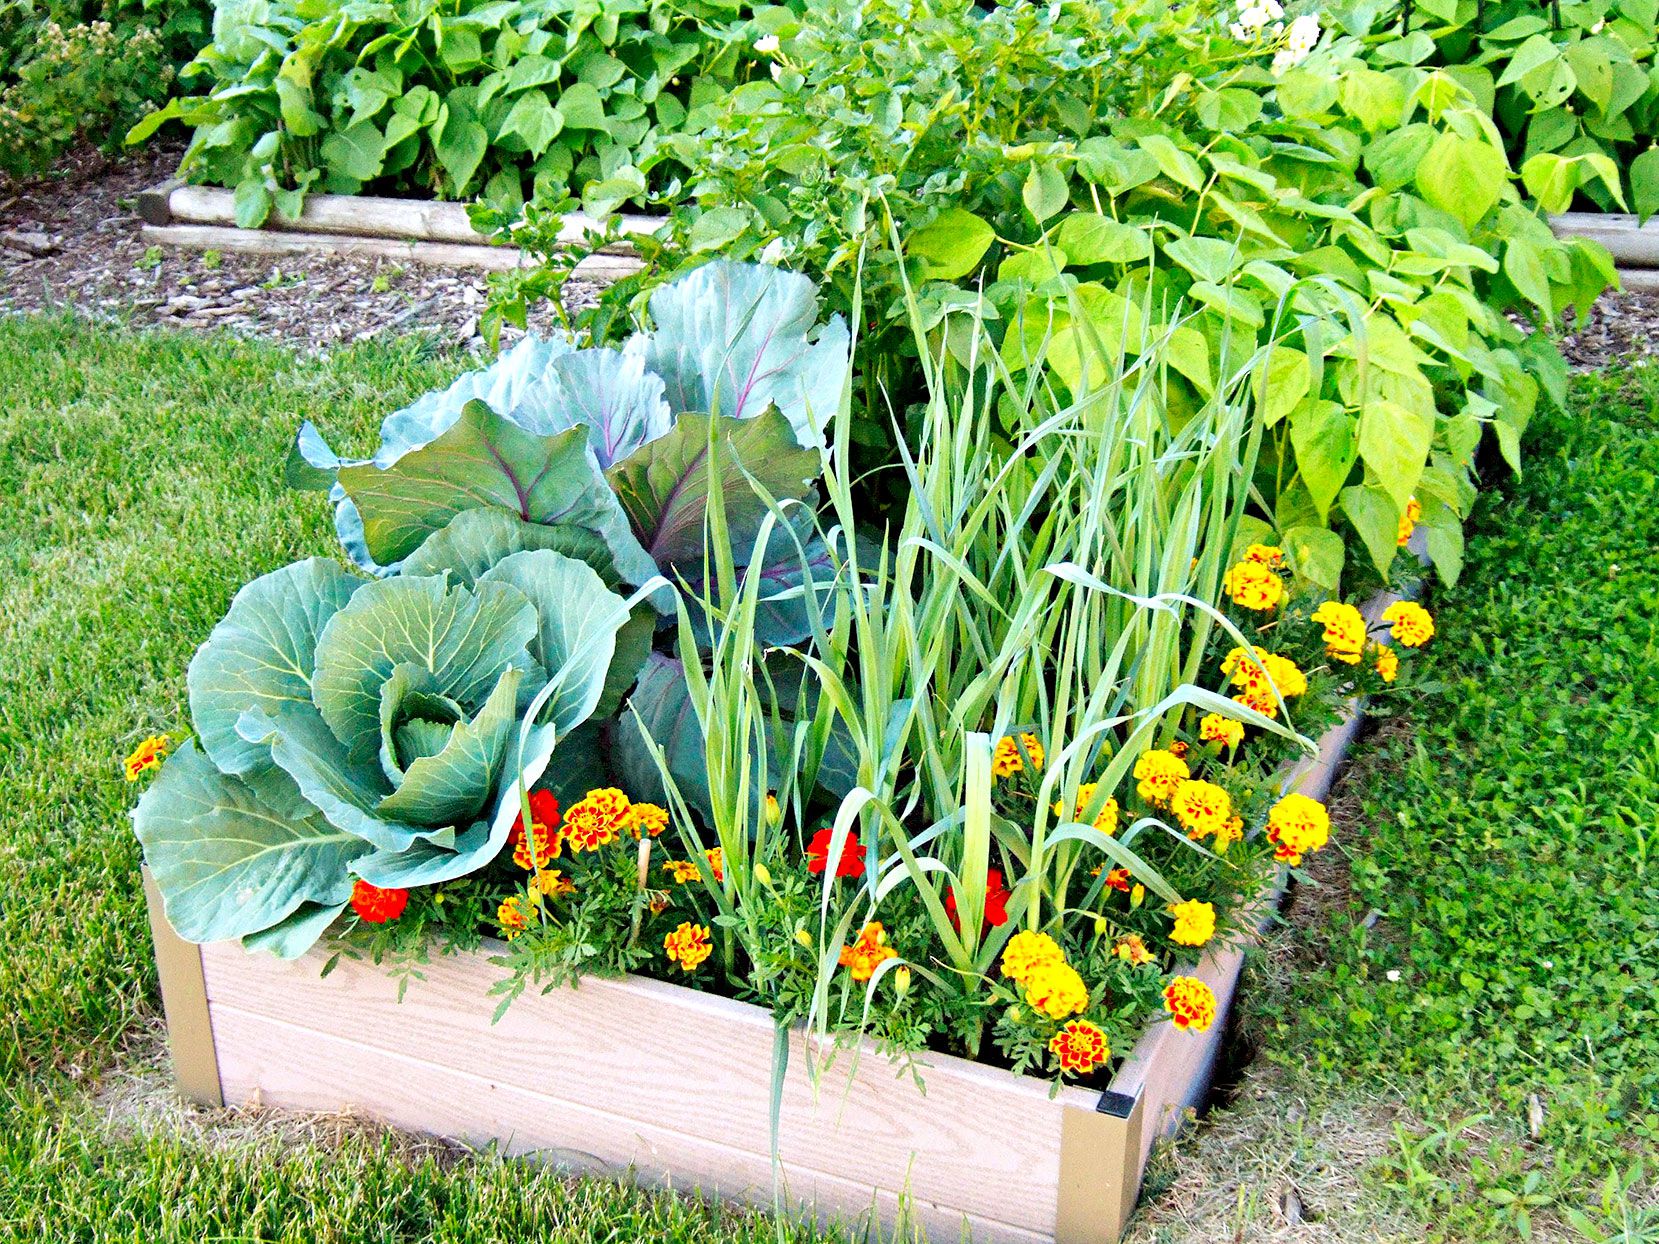 What Grows Well Together In A Vegetable Garden?